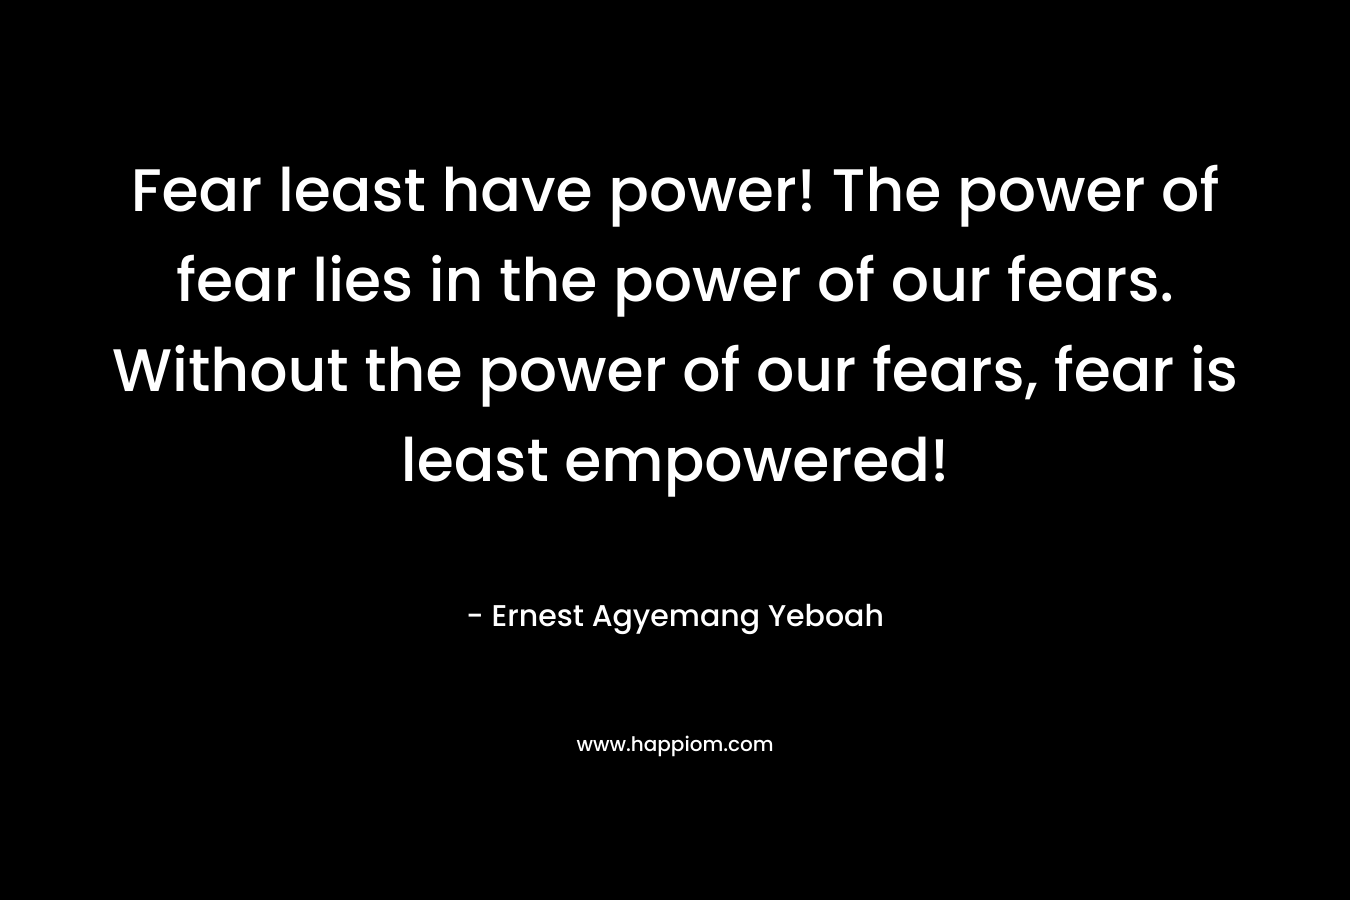 Fear least have power! The power of fear lies in the power of our fears. Without the power of our fears, fear is least empowered!